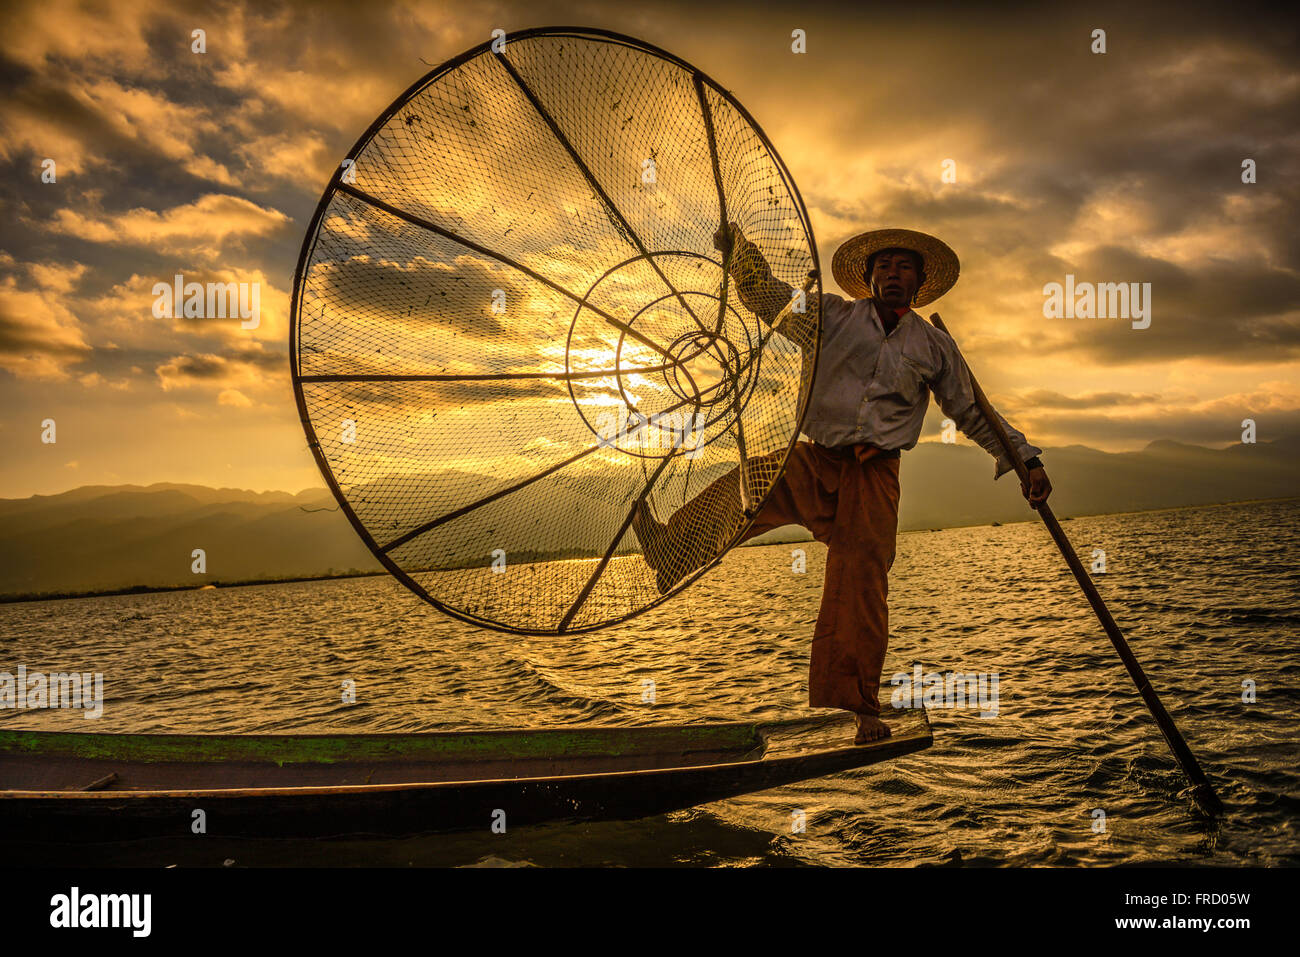 Burmese fisherman fishing on a traditional bamboo boat with a handmade net at sunrise Stock Photo